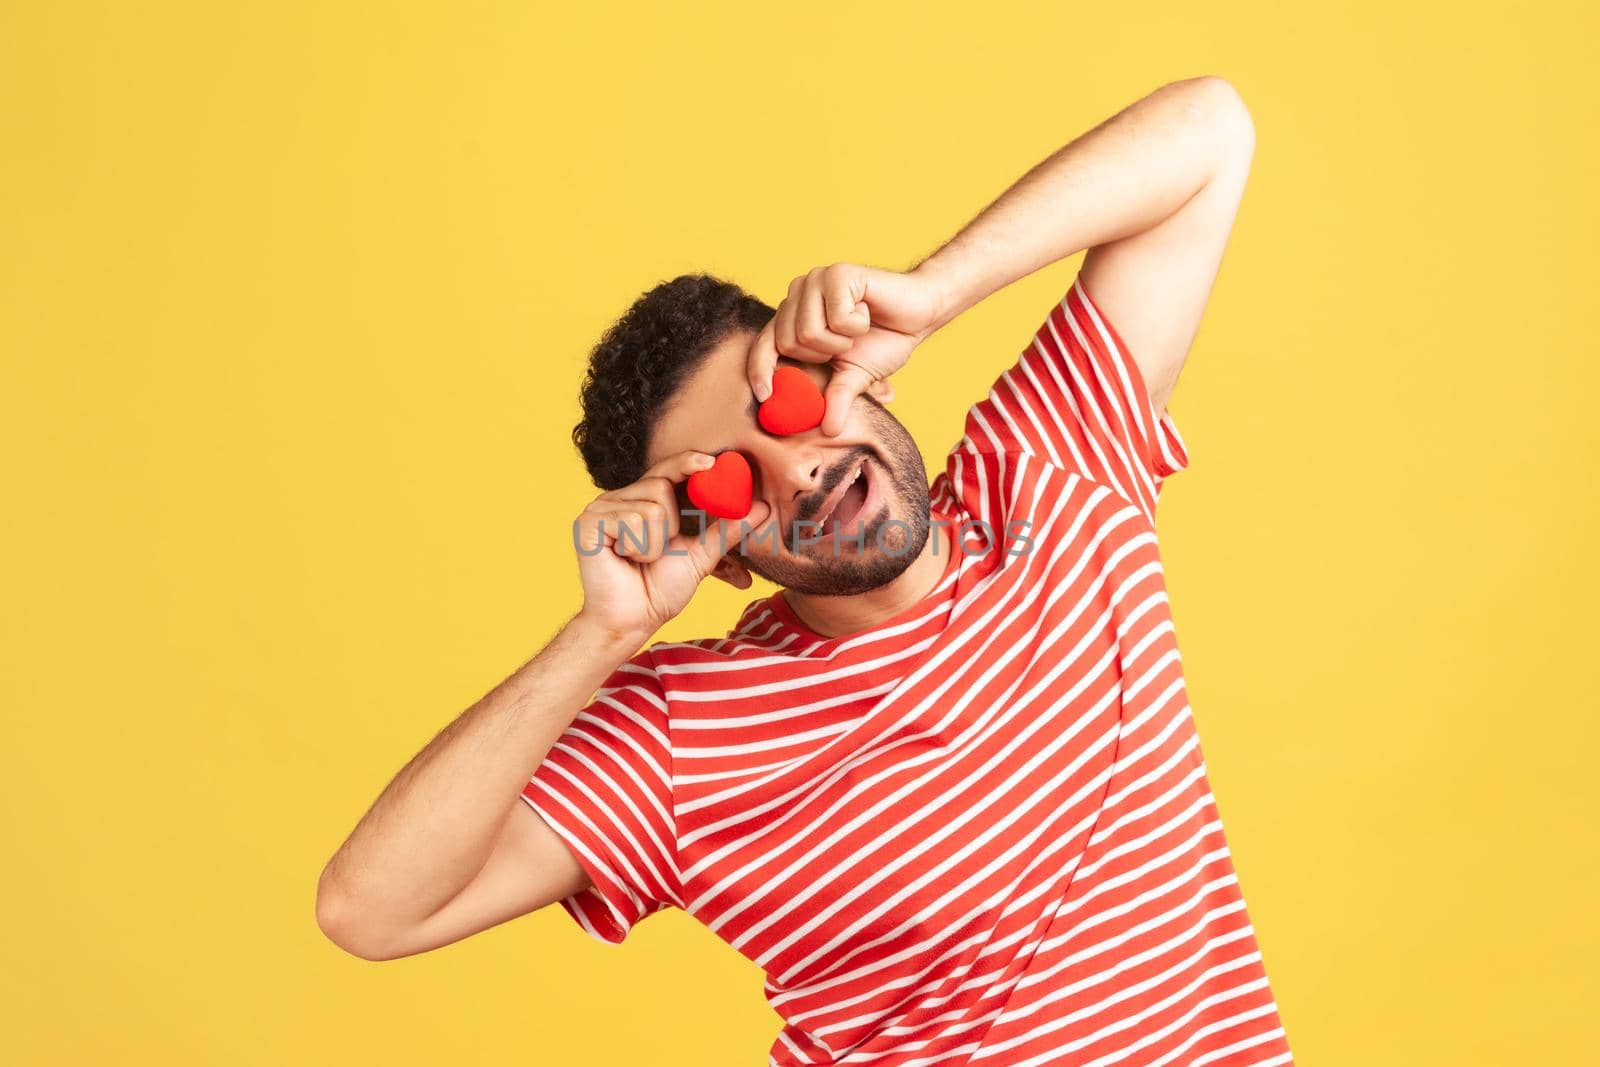 Funny positive man with beard in striped t-shirt having fun holding little toy hearts near eyes and smiling, showing his affection, love confession. Indoor studio shot isolated on yellow background